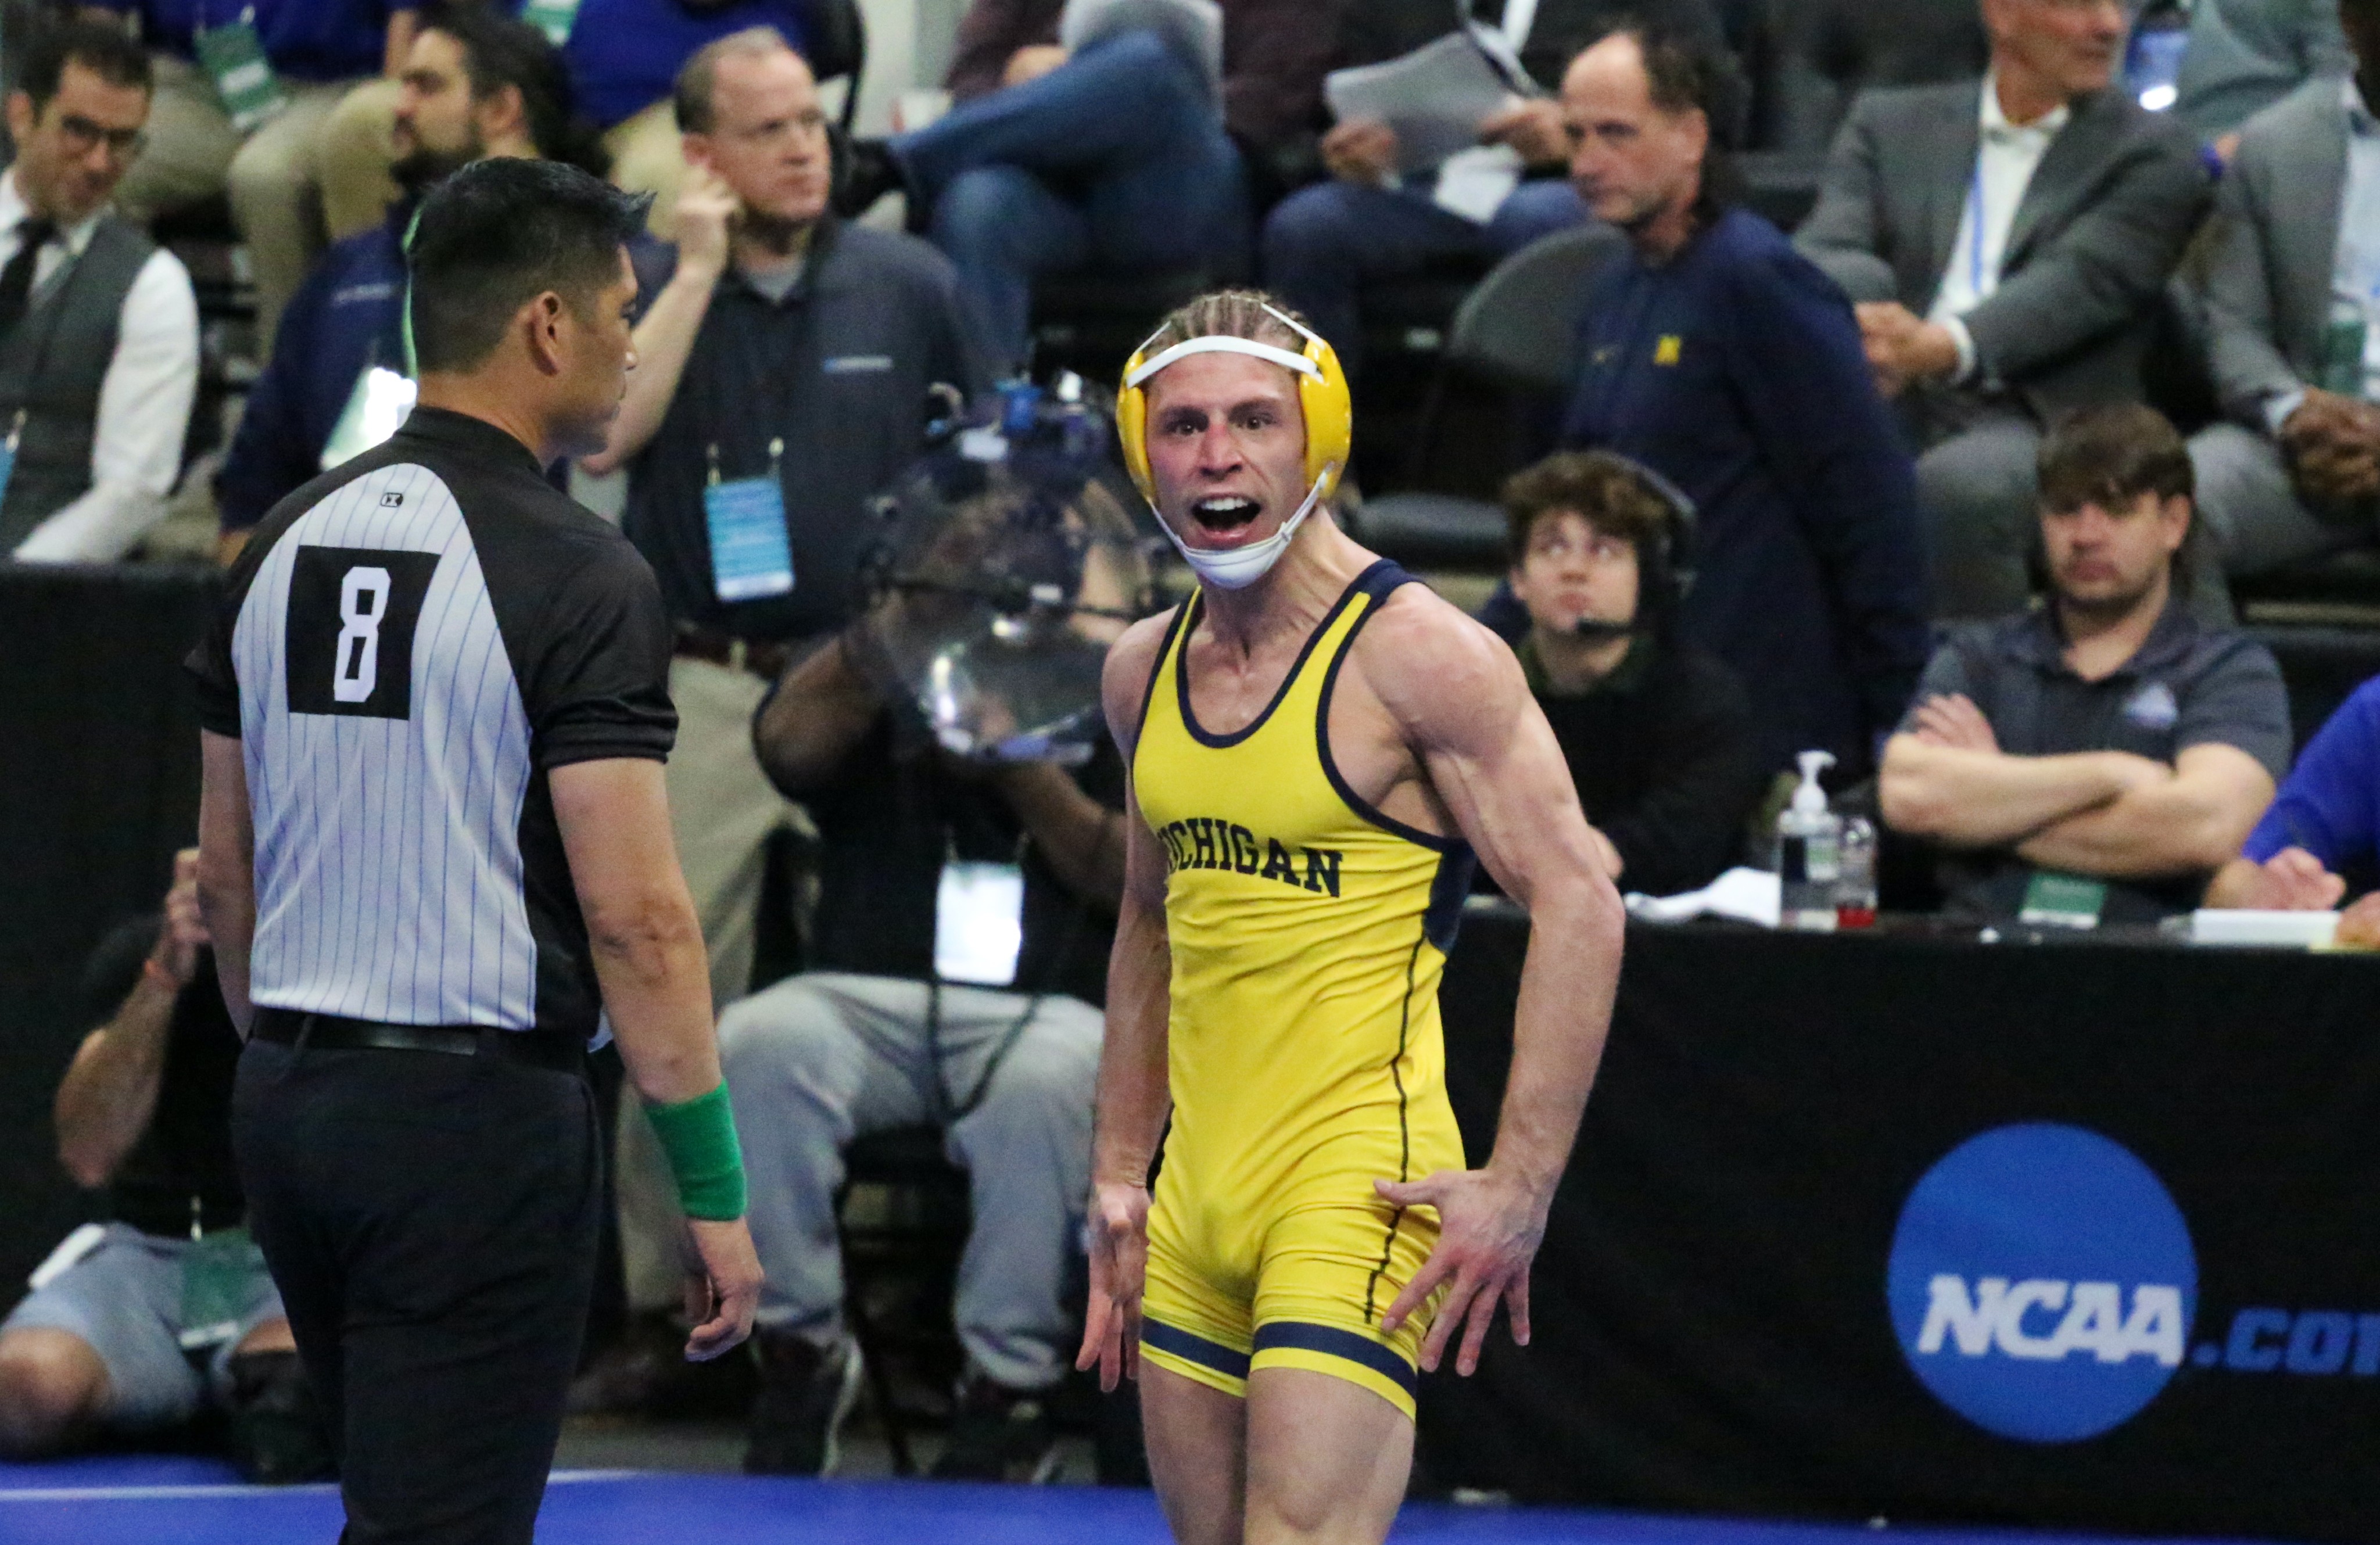 Michigan’s Nick Suriano on verge of another NCAA wrestling title